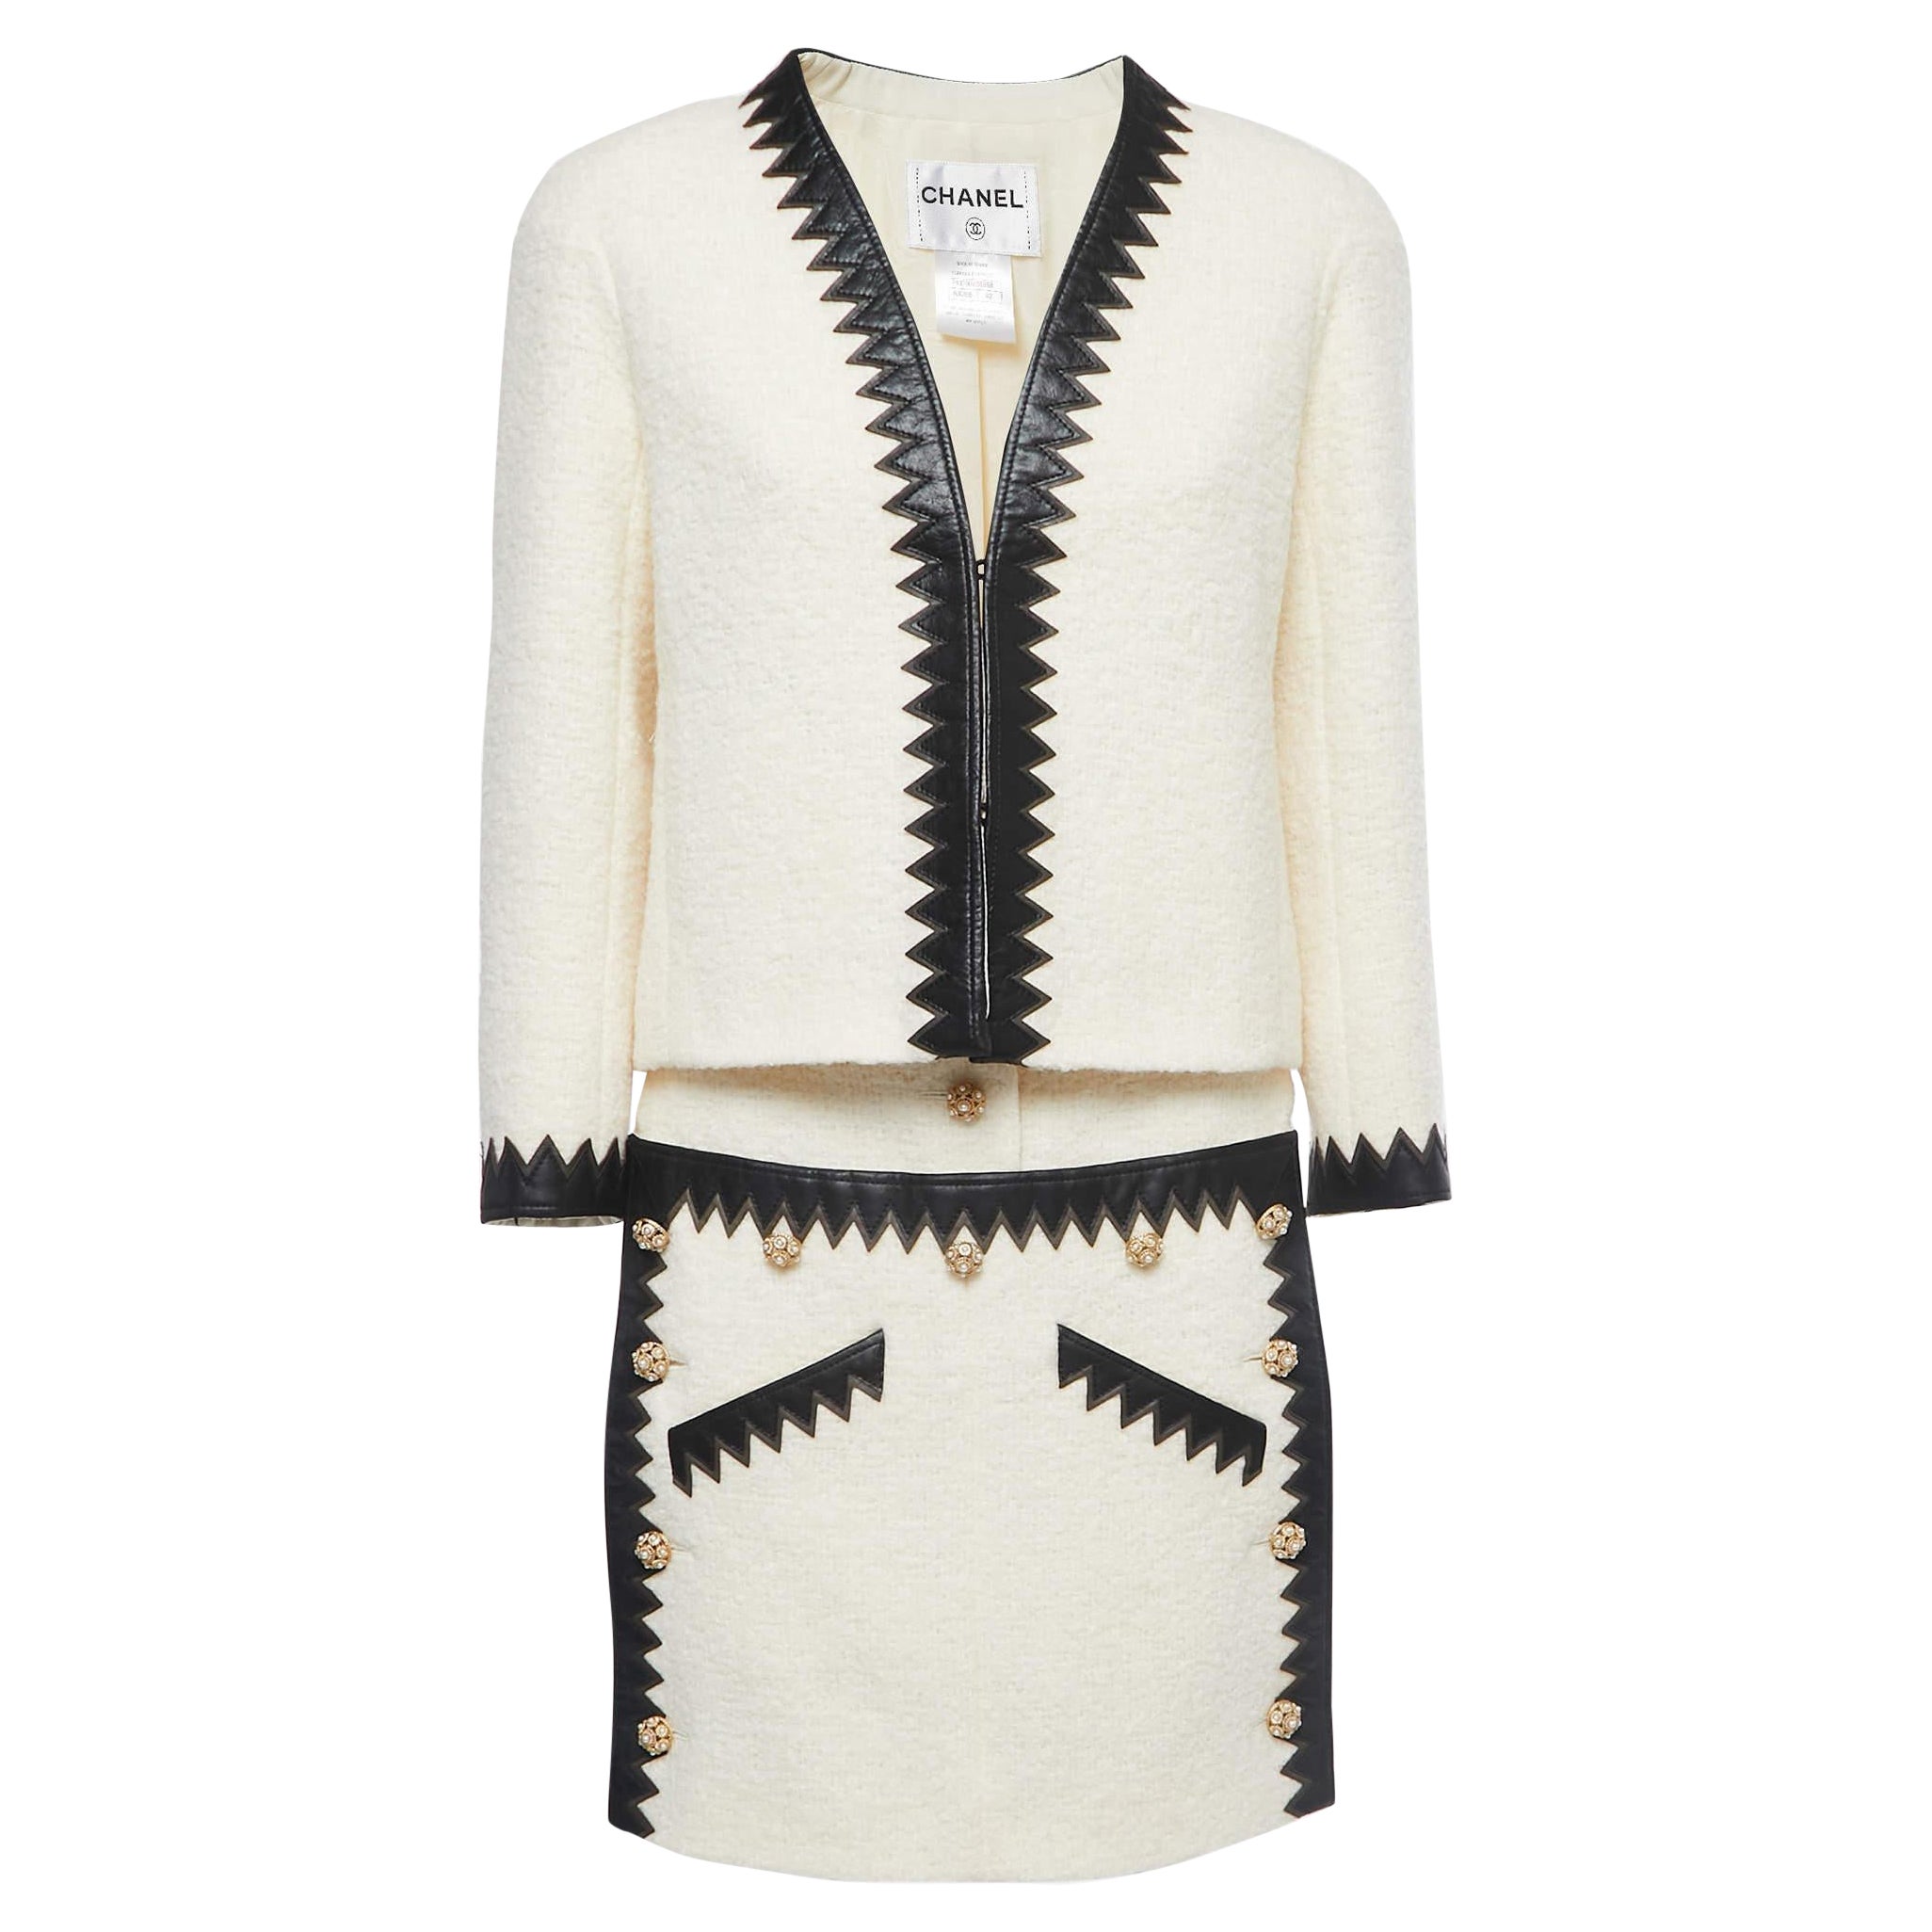 Chanel Cream Boucle Wool Leather Trimmed Salzburg Skirt Suit